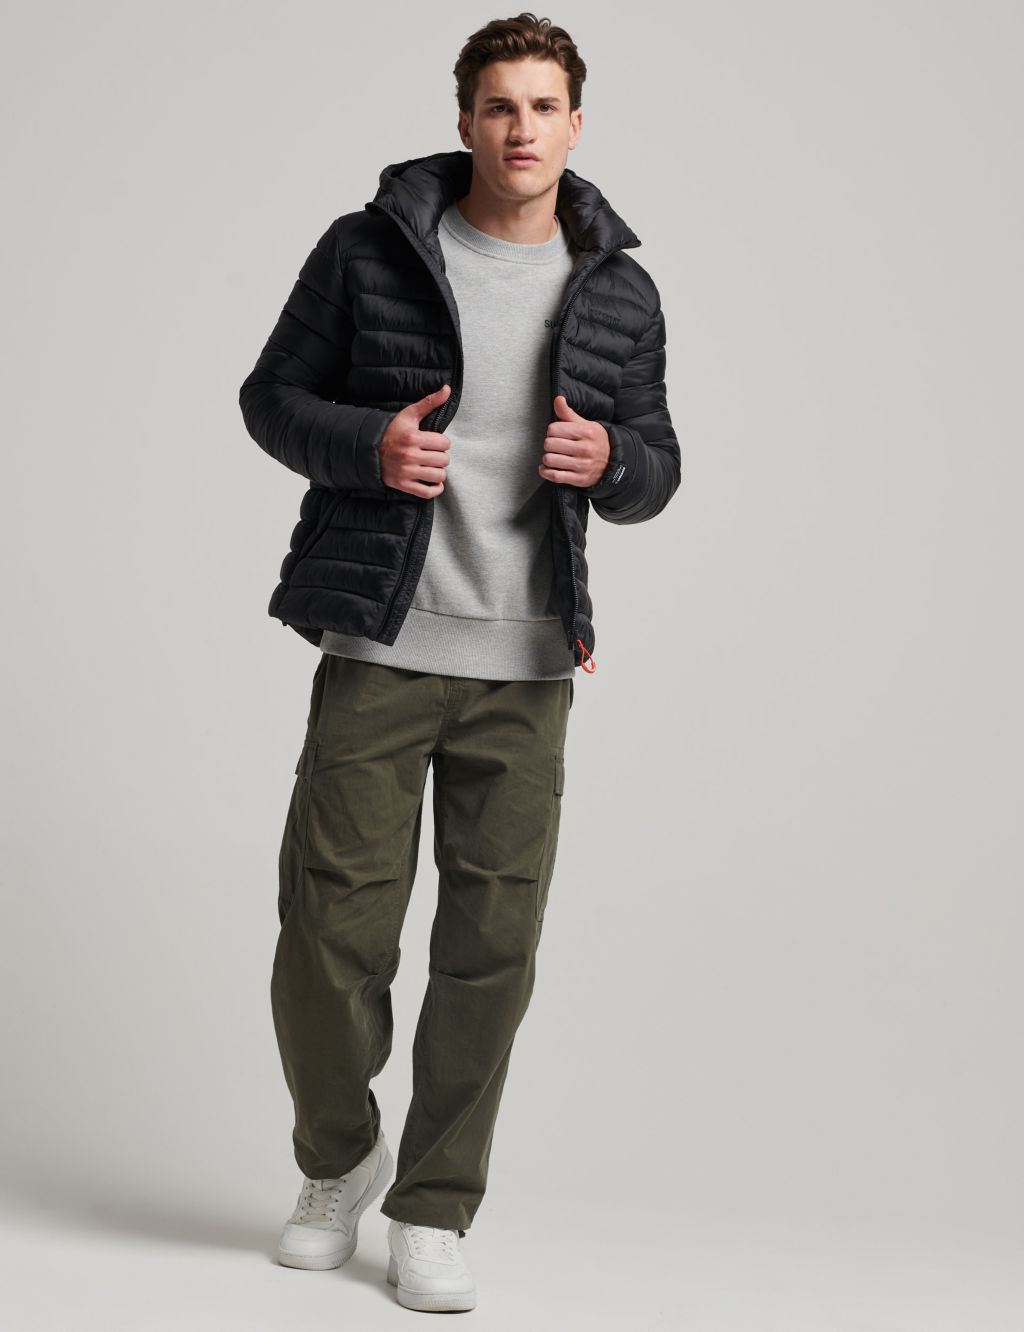 Padded Hooded Puffer Jacket | Superdry | M&S